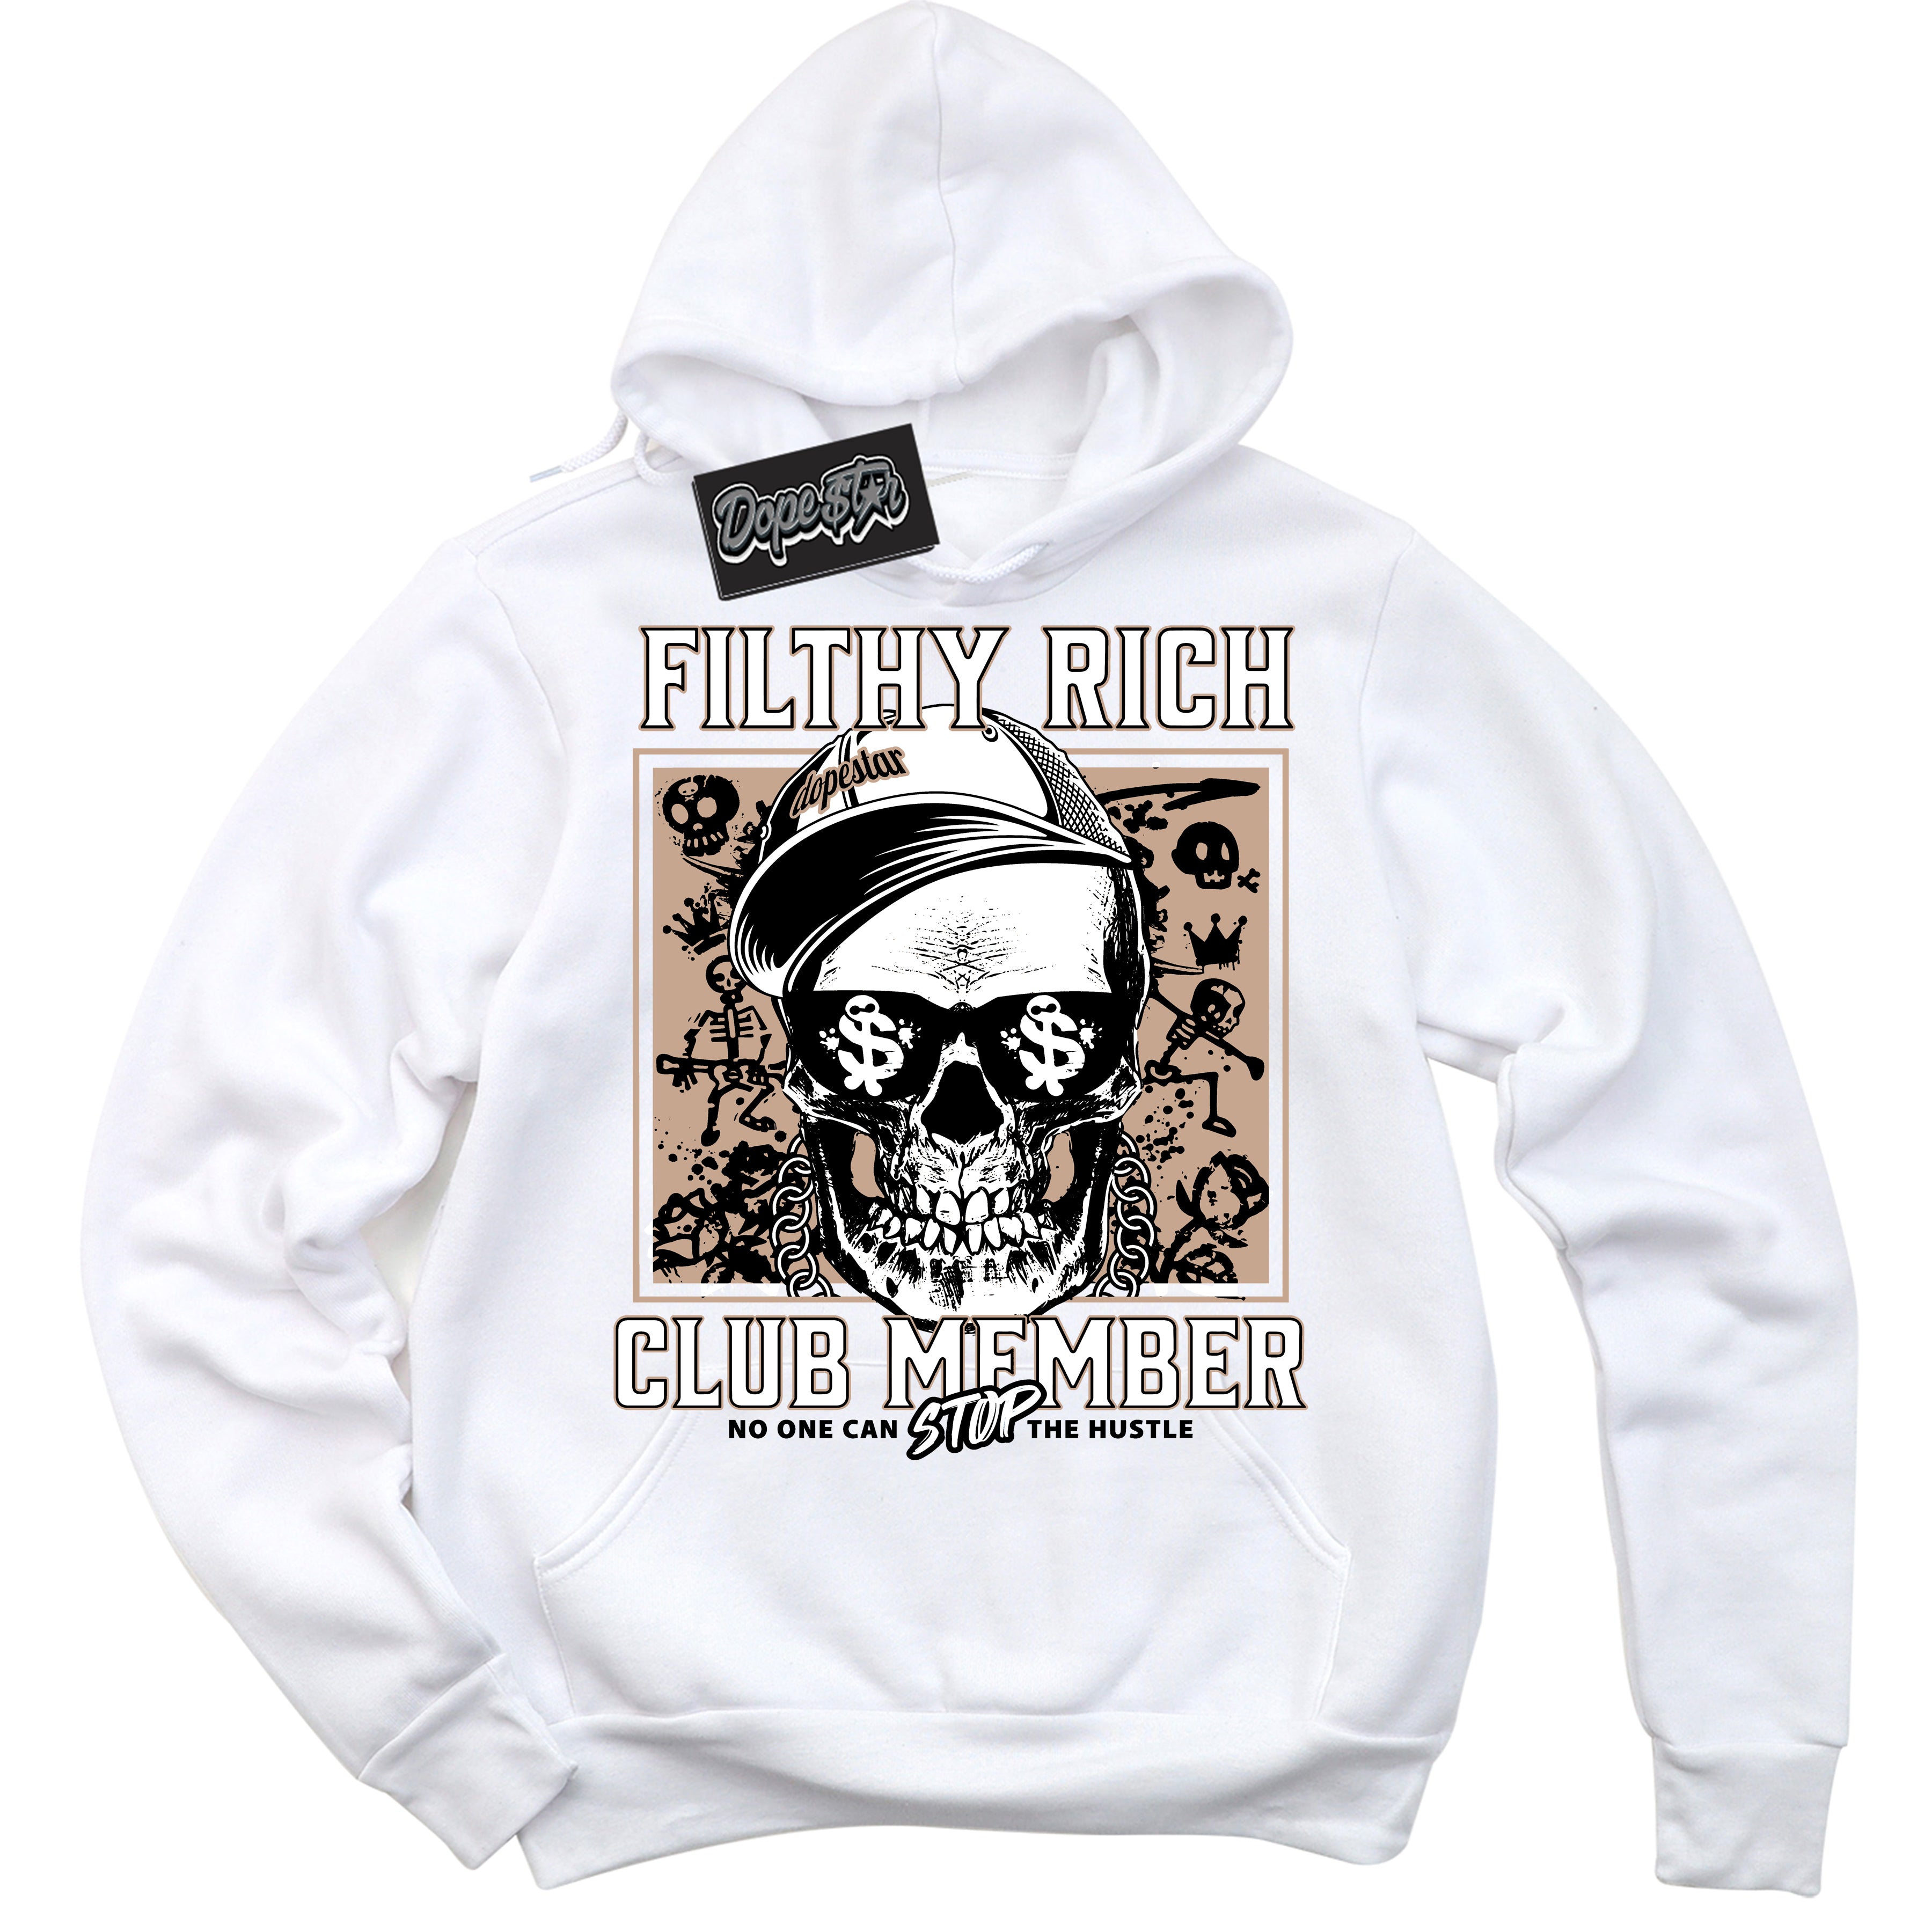 Cool White Hoodie with “ Filthy Rich ”  design that Perfectly Matches Neapolitan 11s Sneakers.